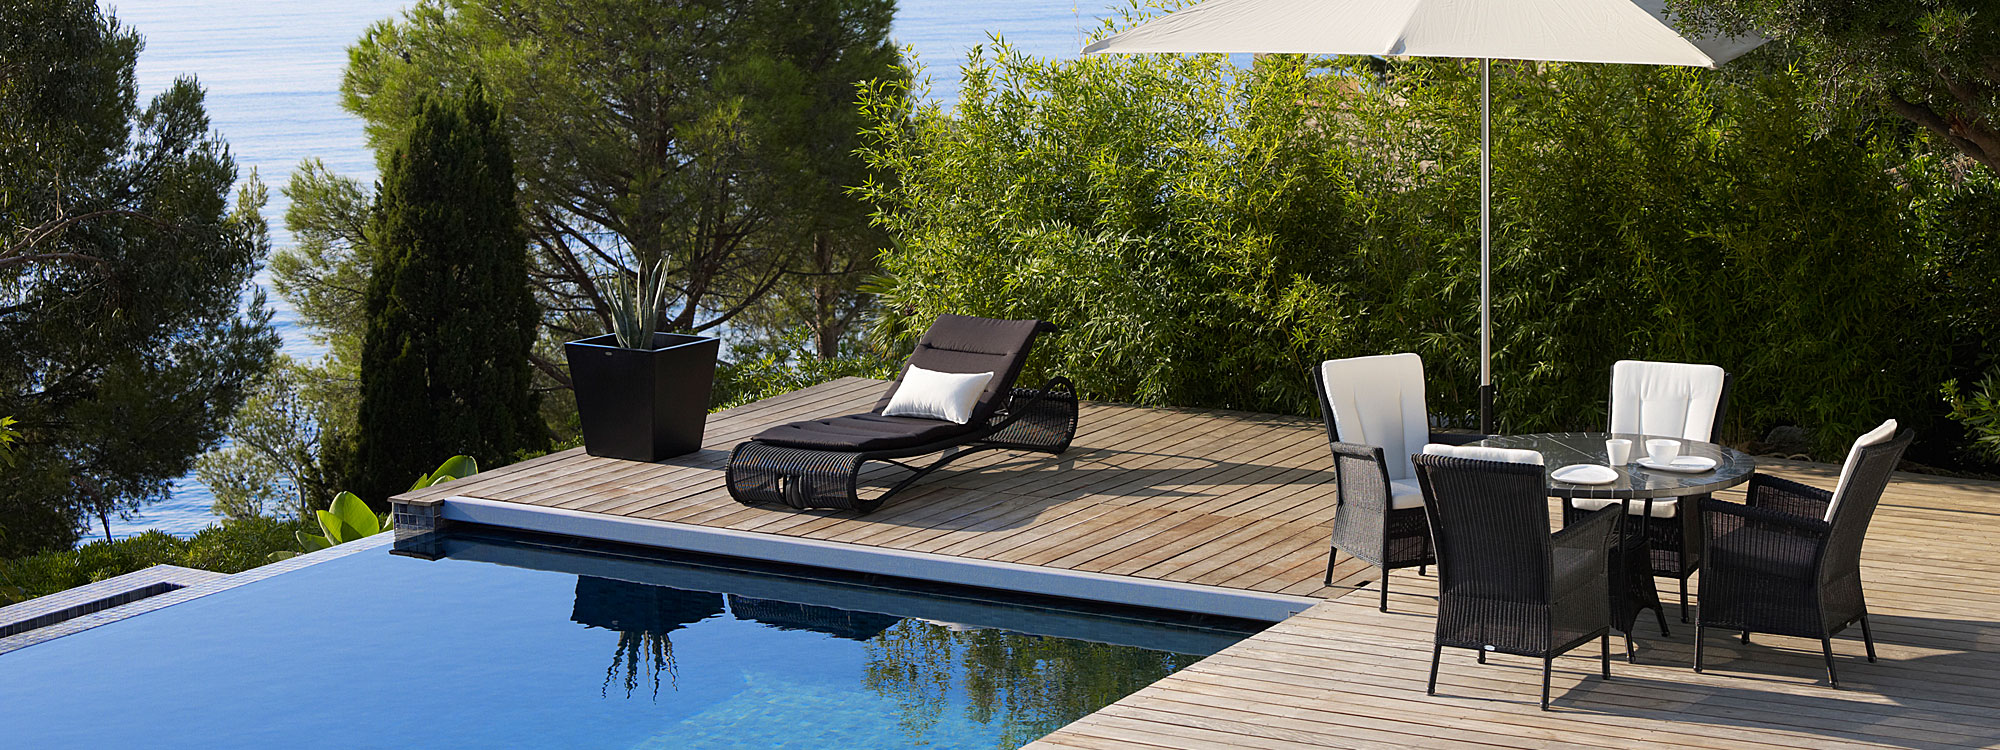 Escape Sun Lounger In Black Cane-line Weave next to swimming pool